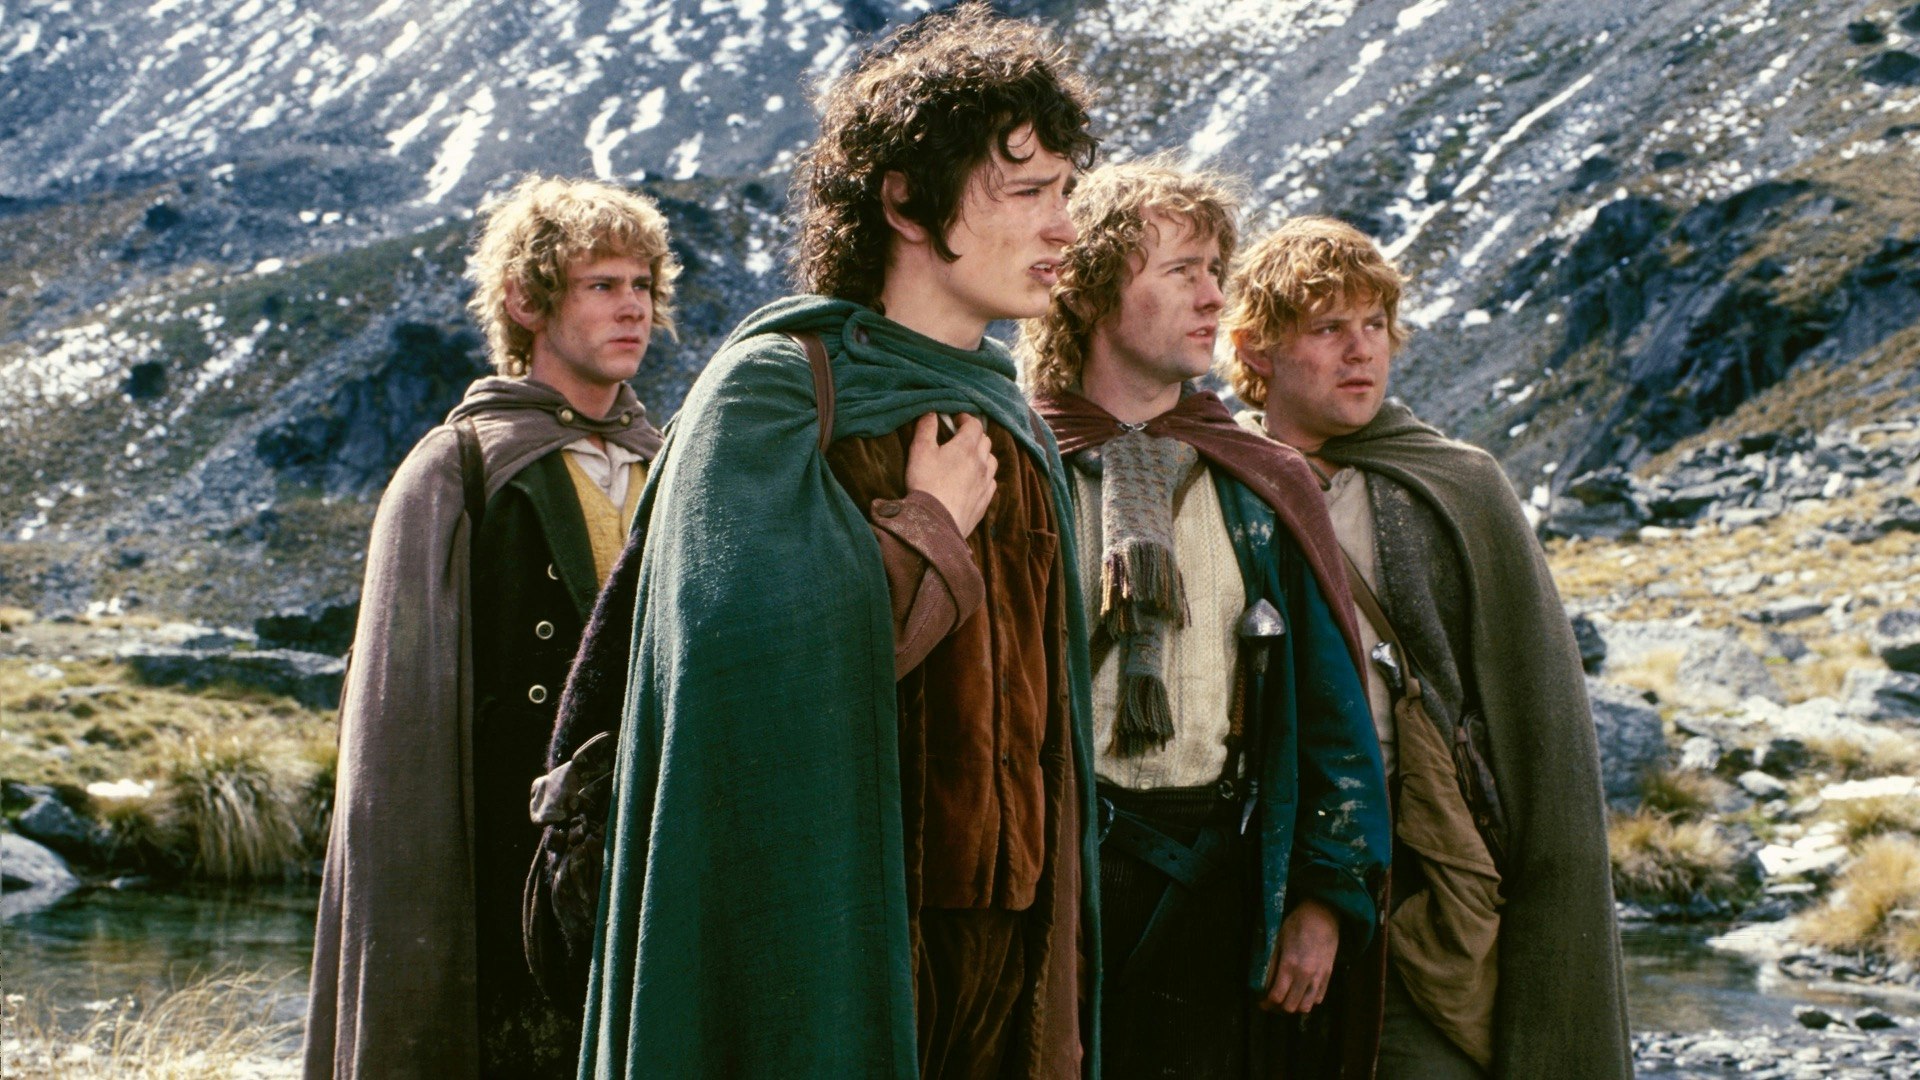 The Lord of the Rings: The Fellowship of the Ring:' The Beginning